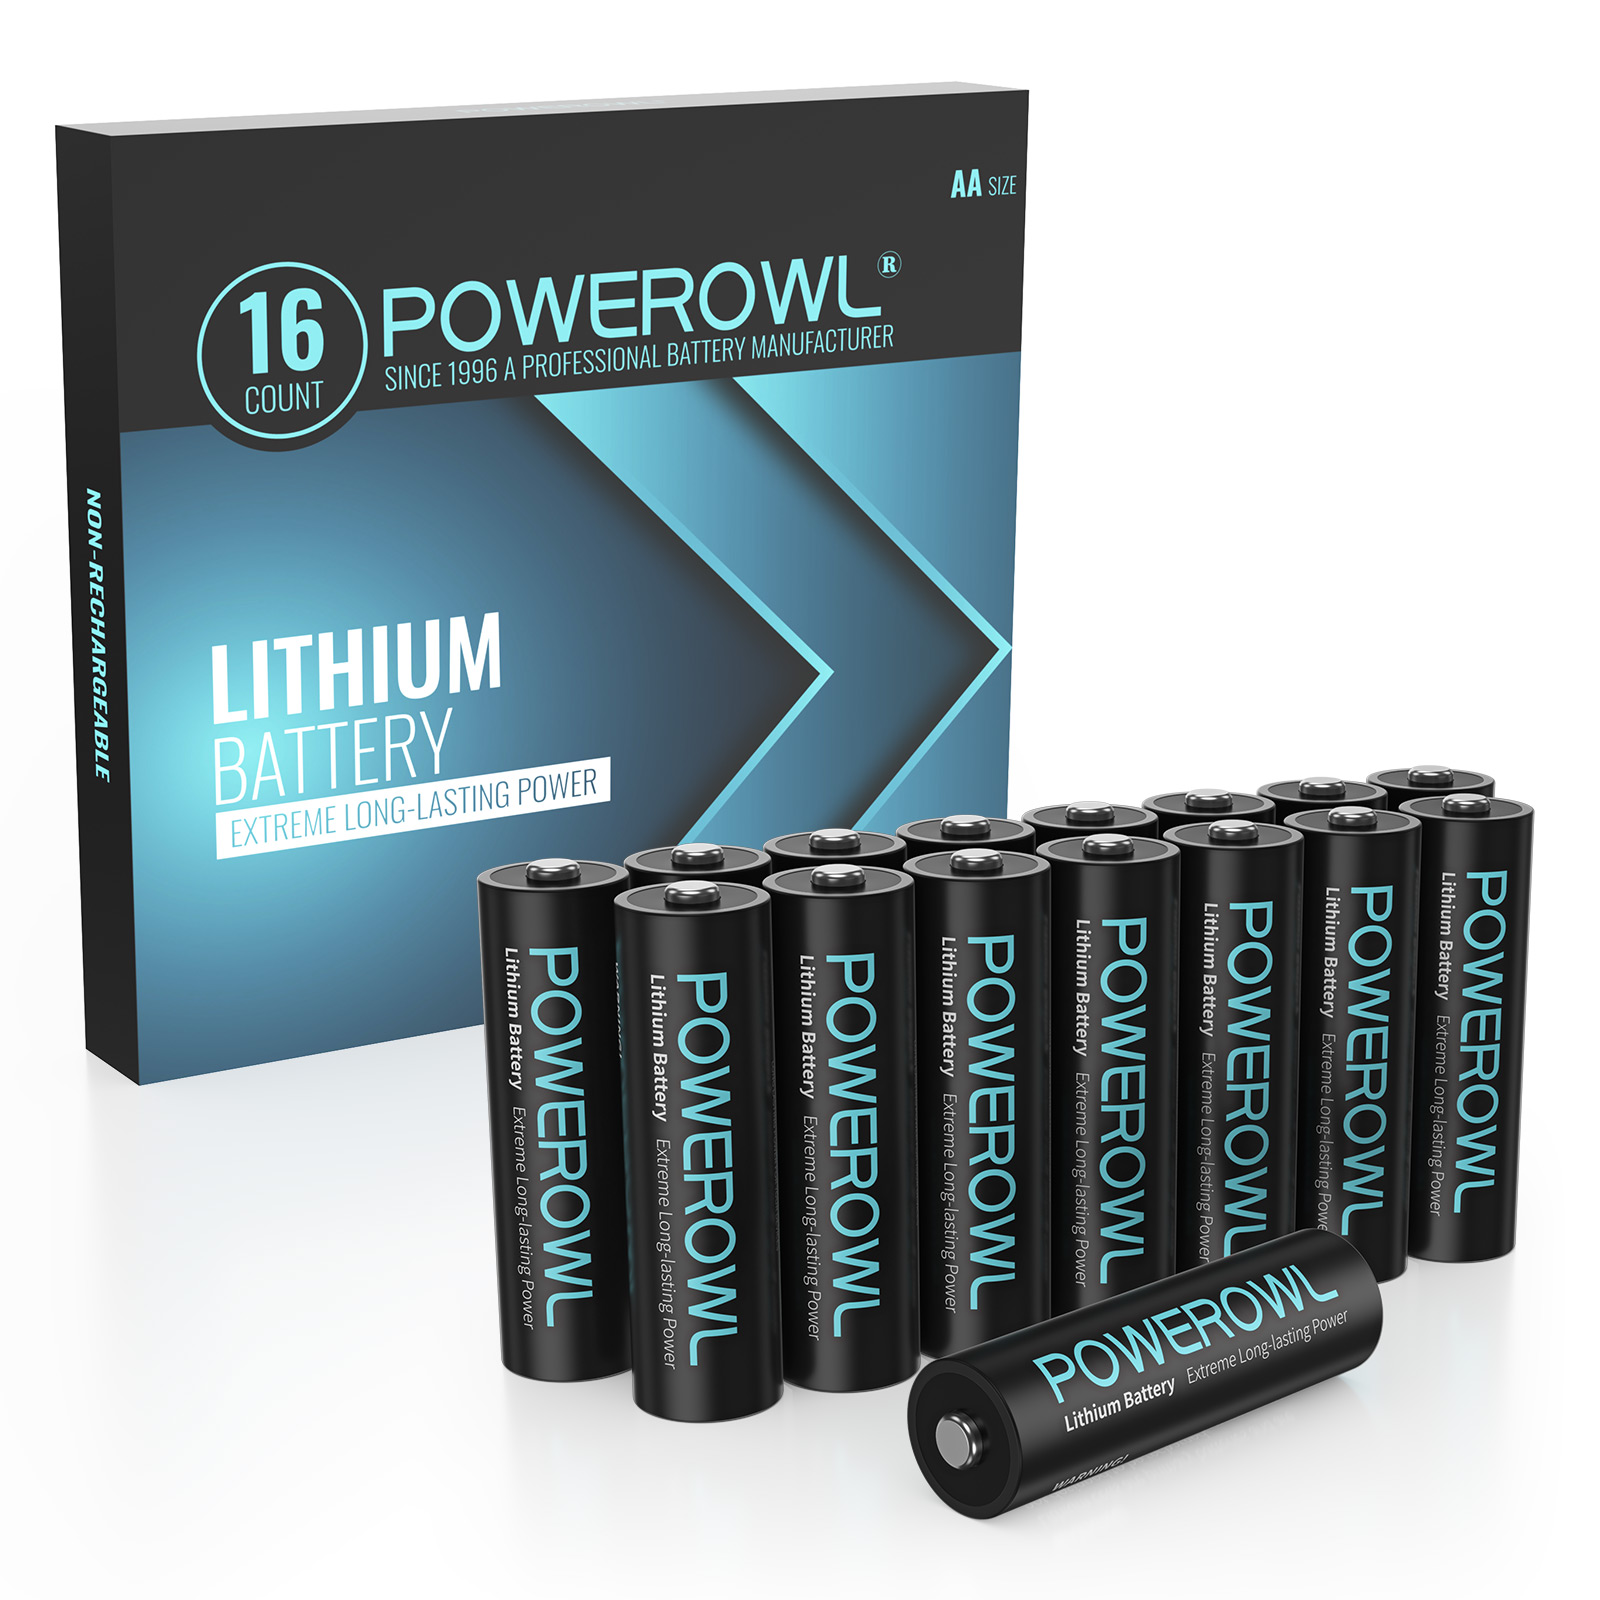 POWEROWL Lithium Batteries AA 16 Pack, High Capacity 1.5V Double A Battery Long Lasting Power for High-Tech Devices